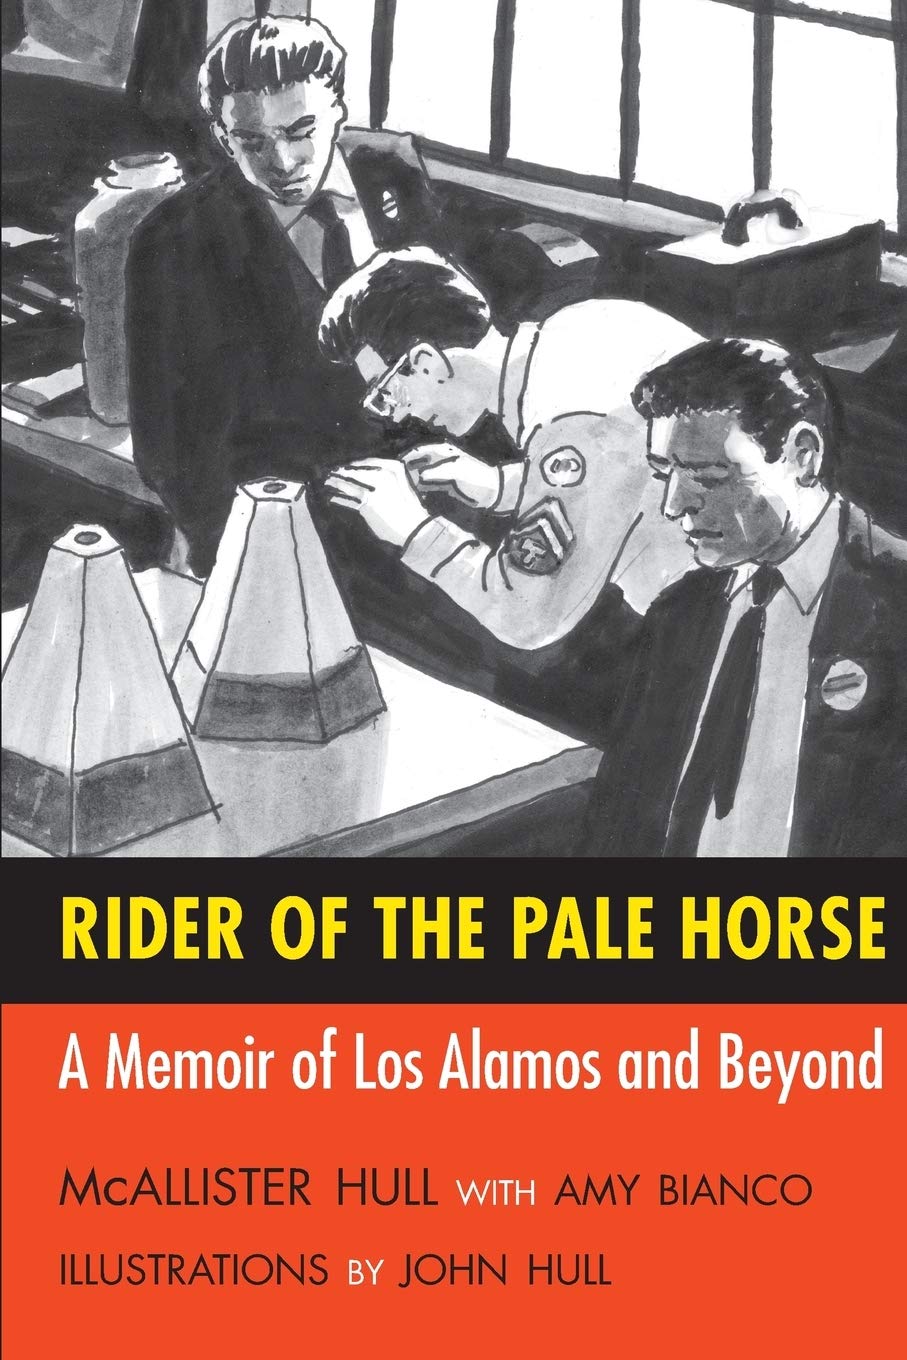 Rider of the Pale Horse